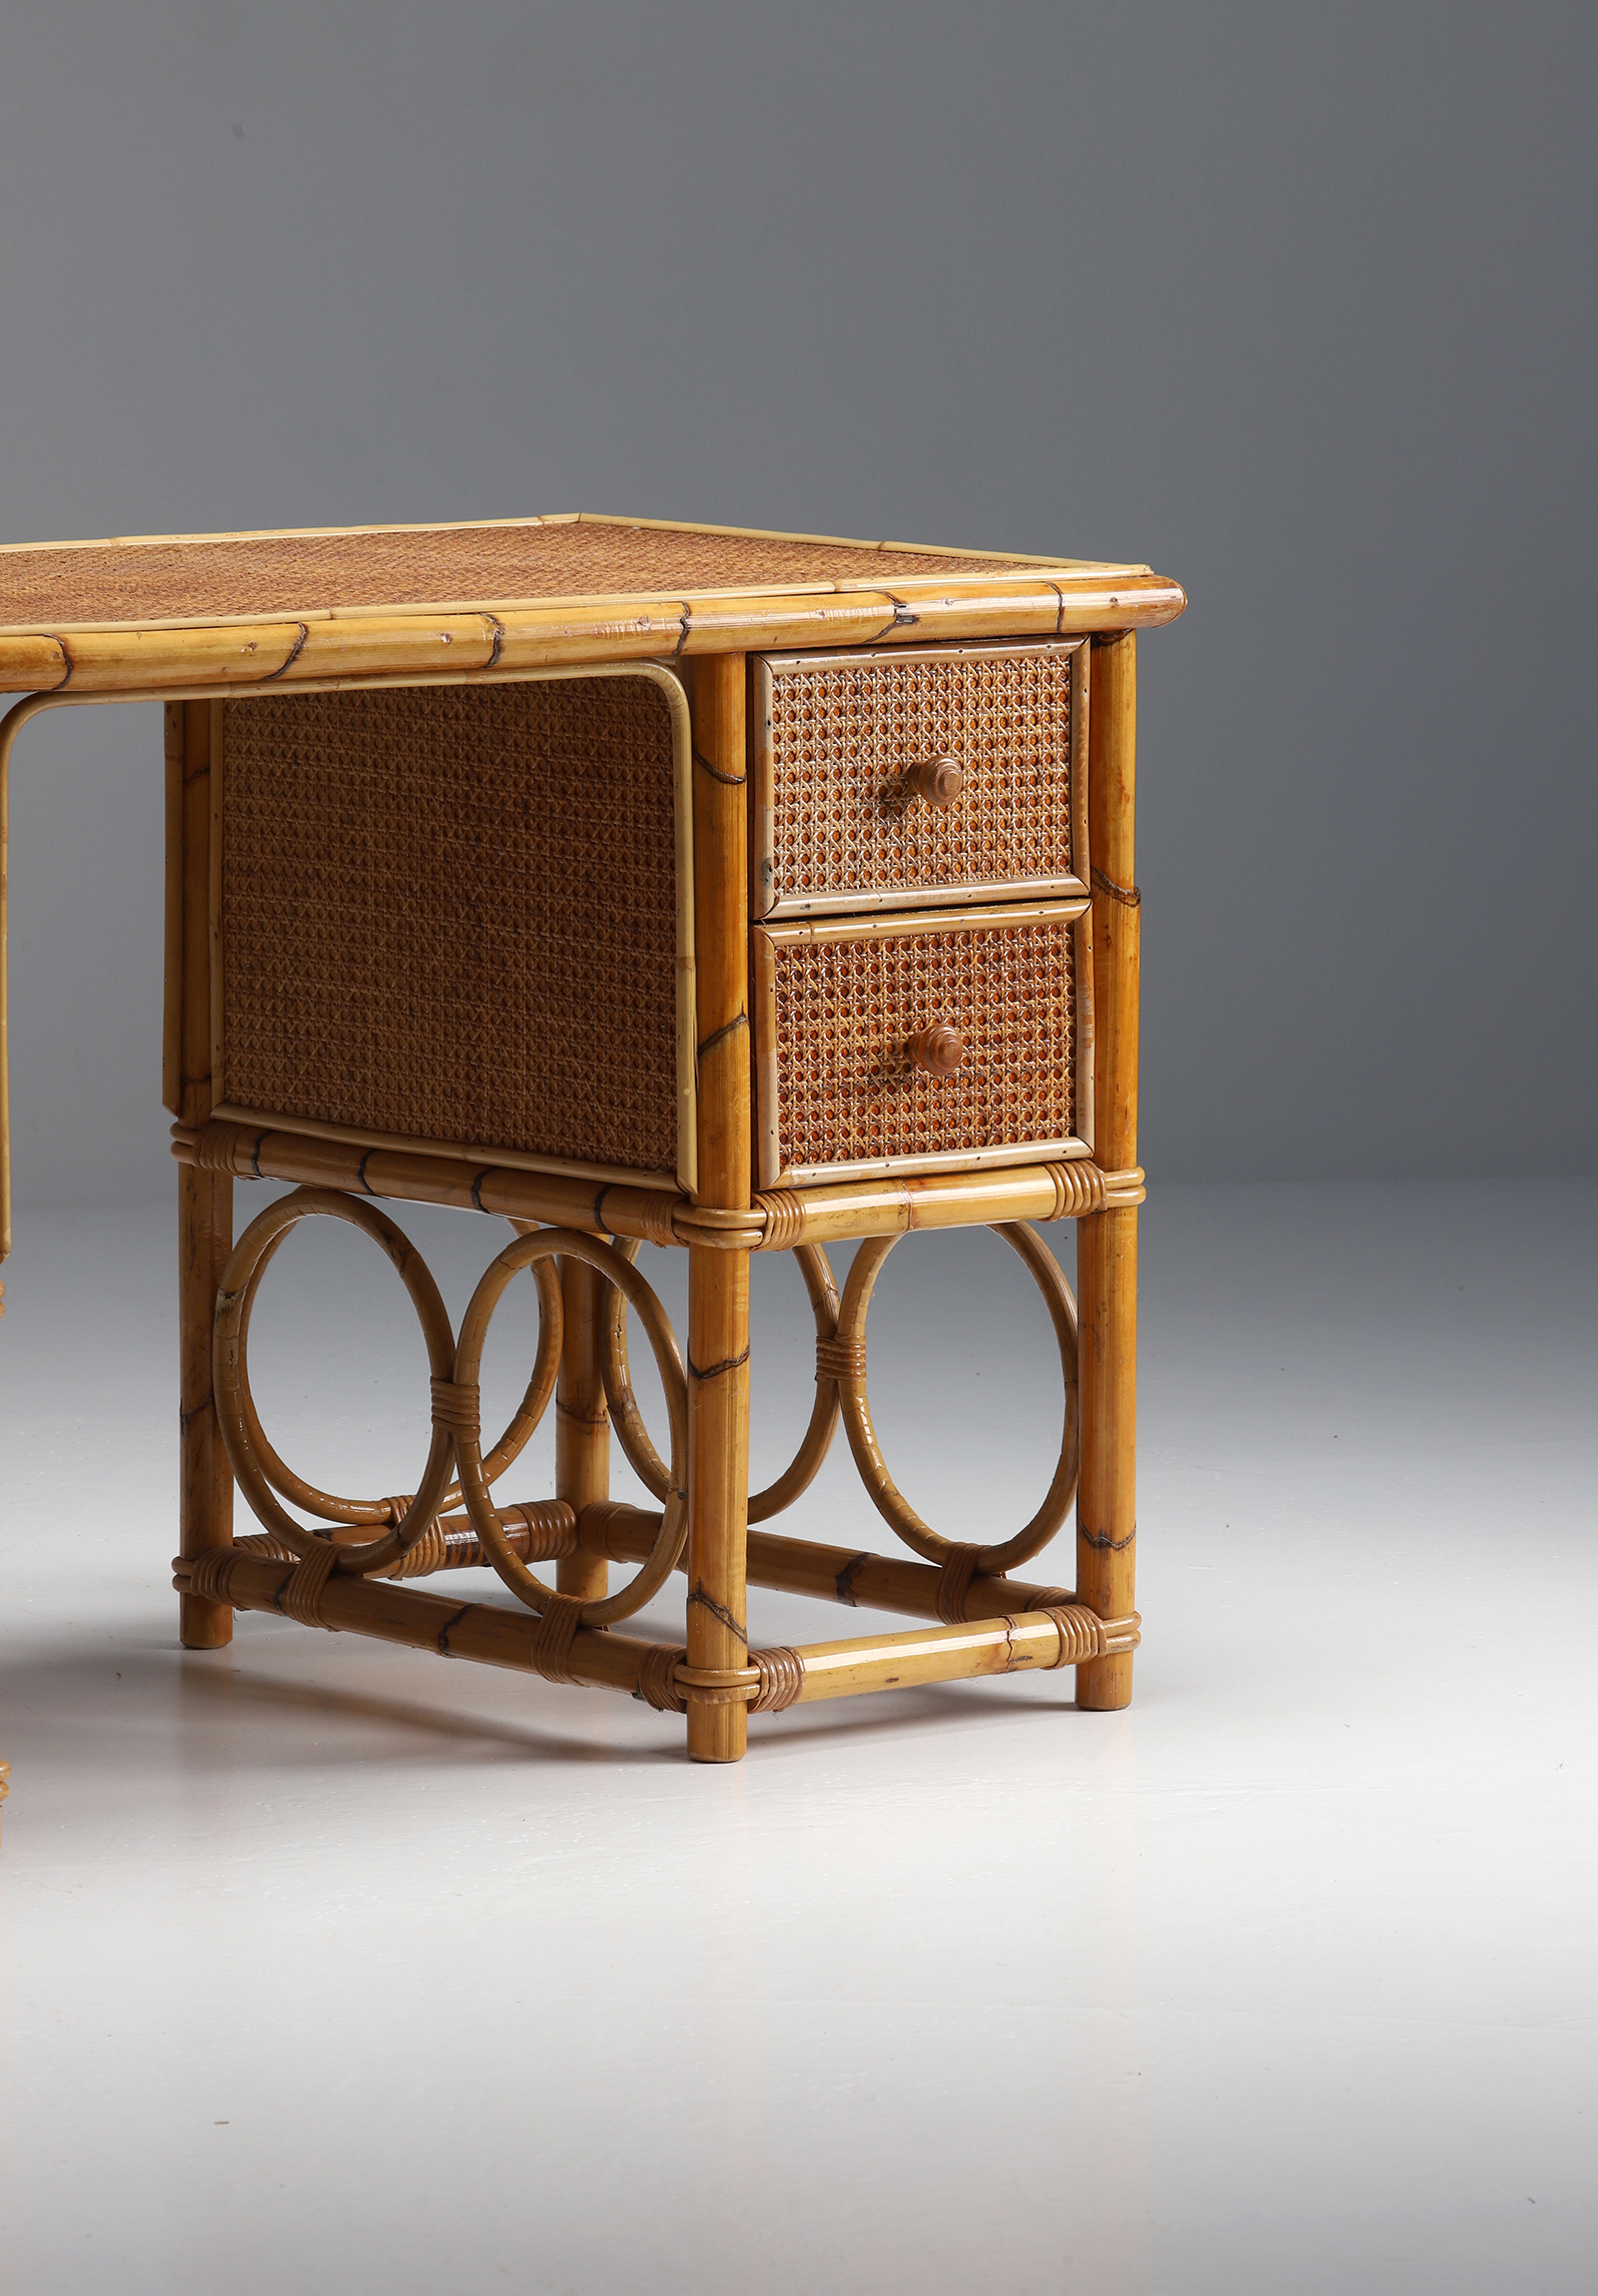 1970s Decorative Bamboo desk in French Riviera styleimage 2